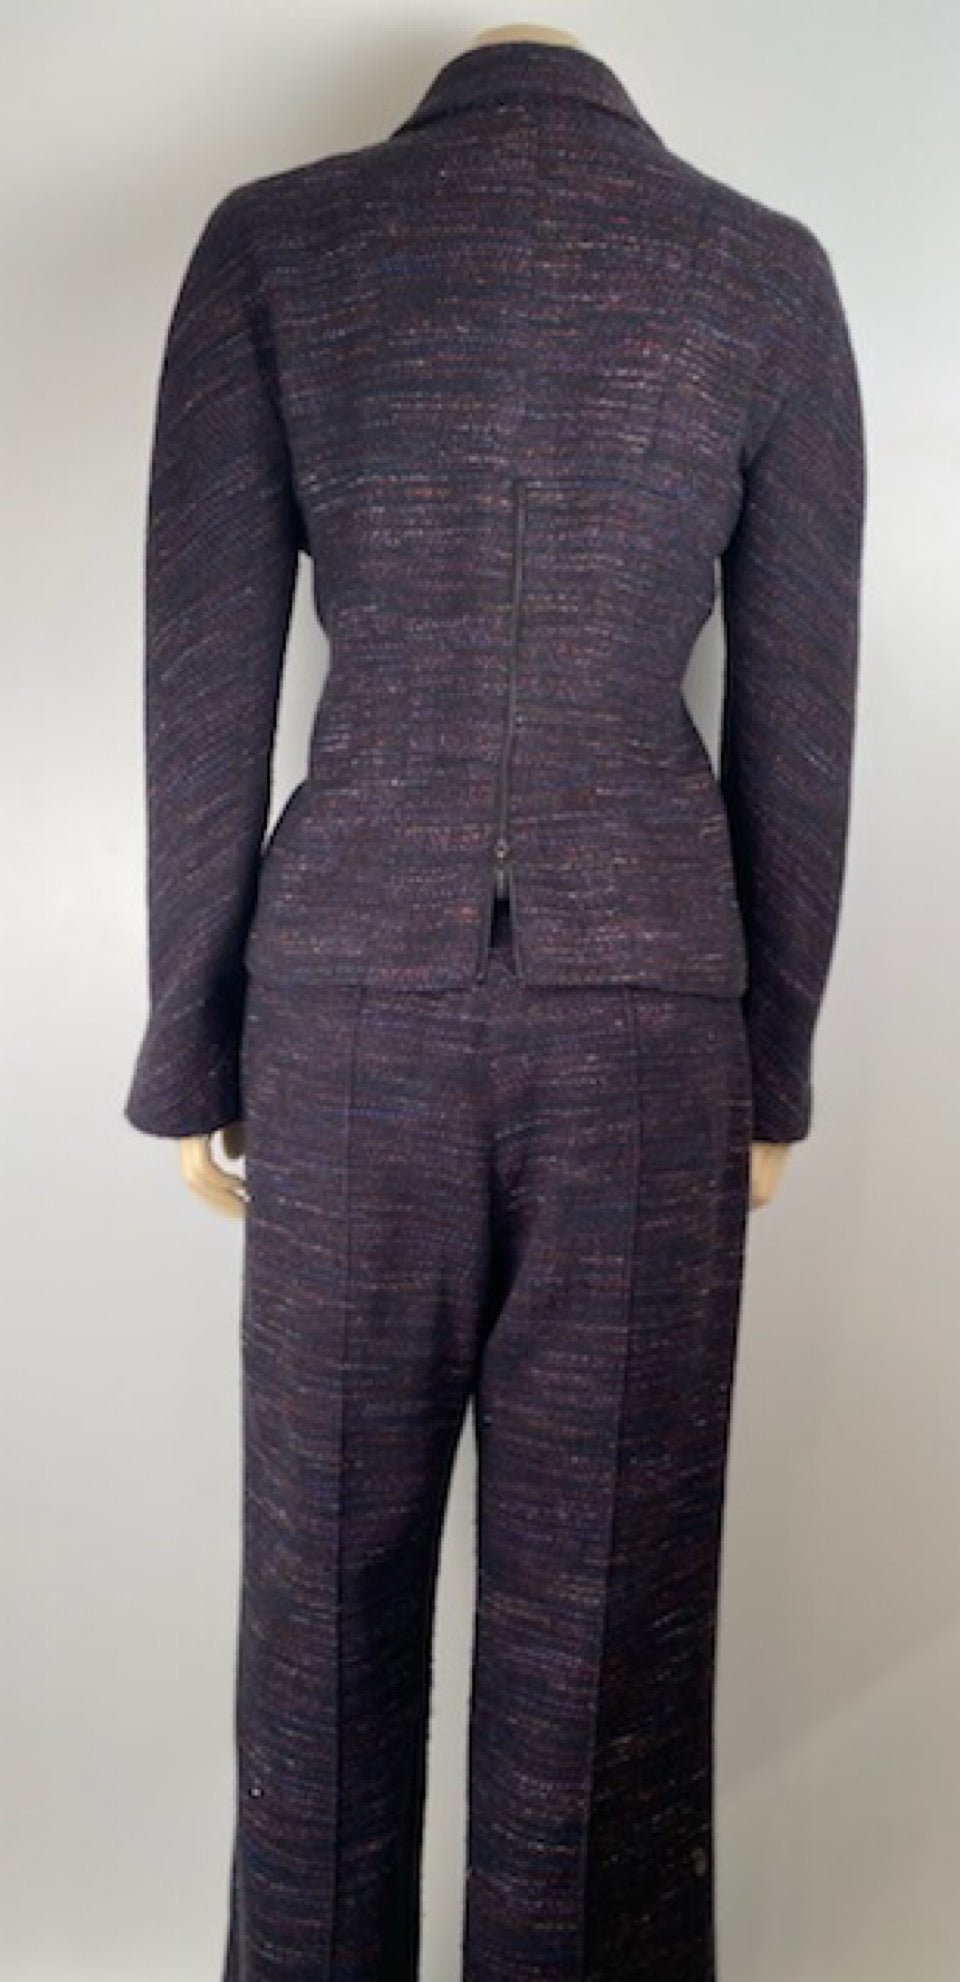 CHANEL, Jackets & Coats, Chanel Tweed Jacket Size 42 Navy With Silver  Gold Blue Thread